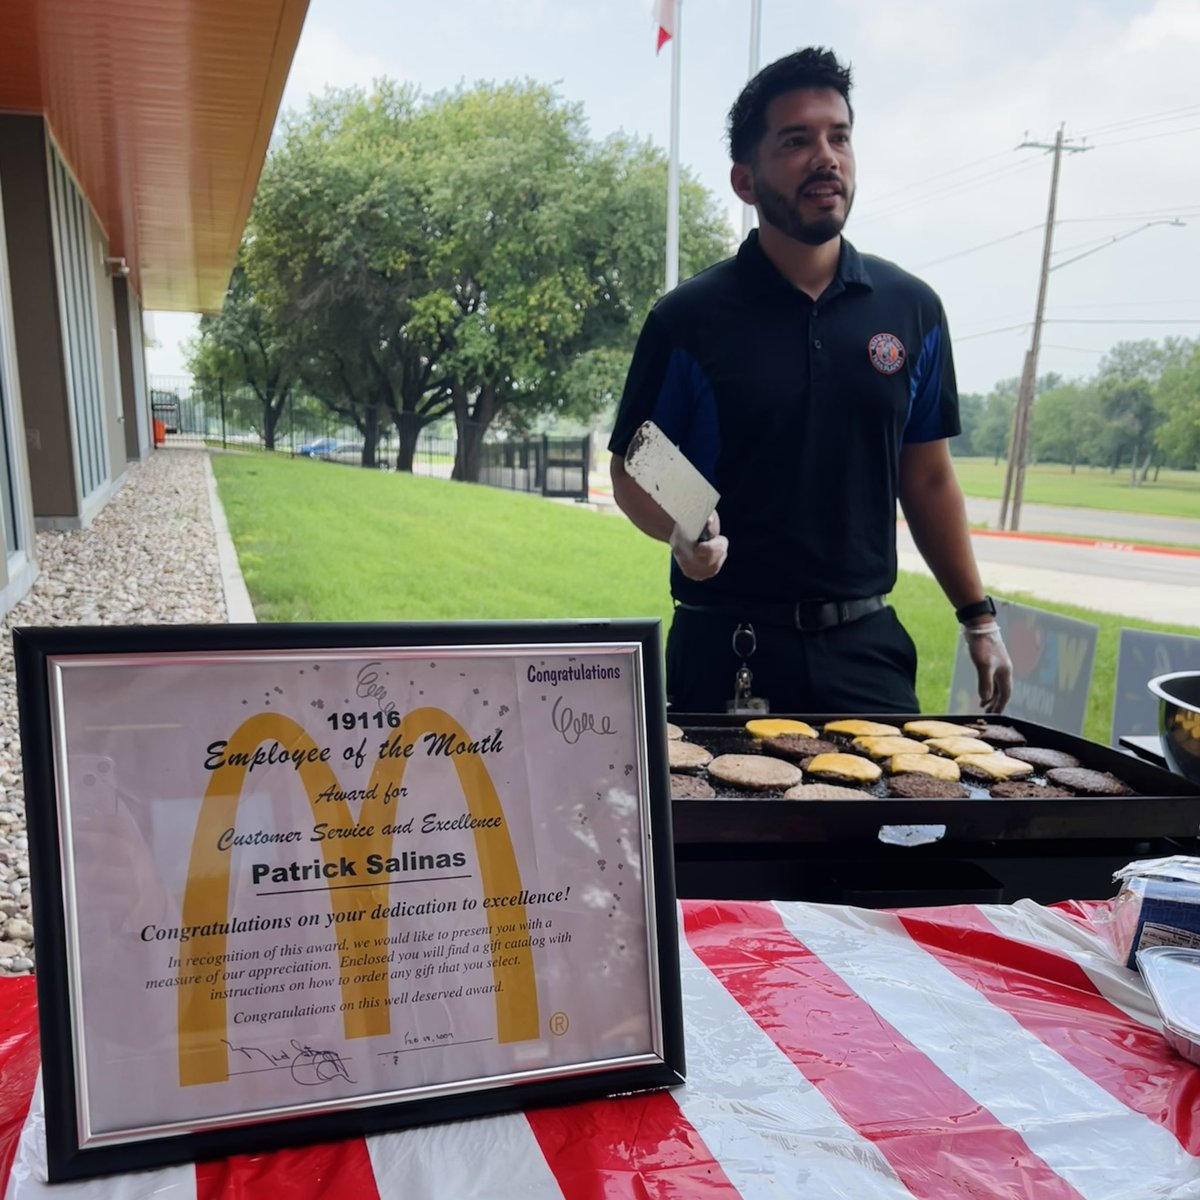 🍔Today for Teacher Appreciation, Principal Salinas showcased his burger-flipping skills, serving up burgers for the staff! 

Fun fact: He was once employee of the month at McDonalds!🎉 

#AISDProud 
#KidsDeserveIt